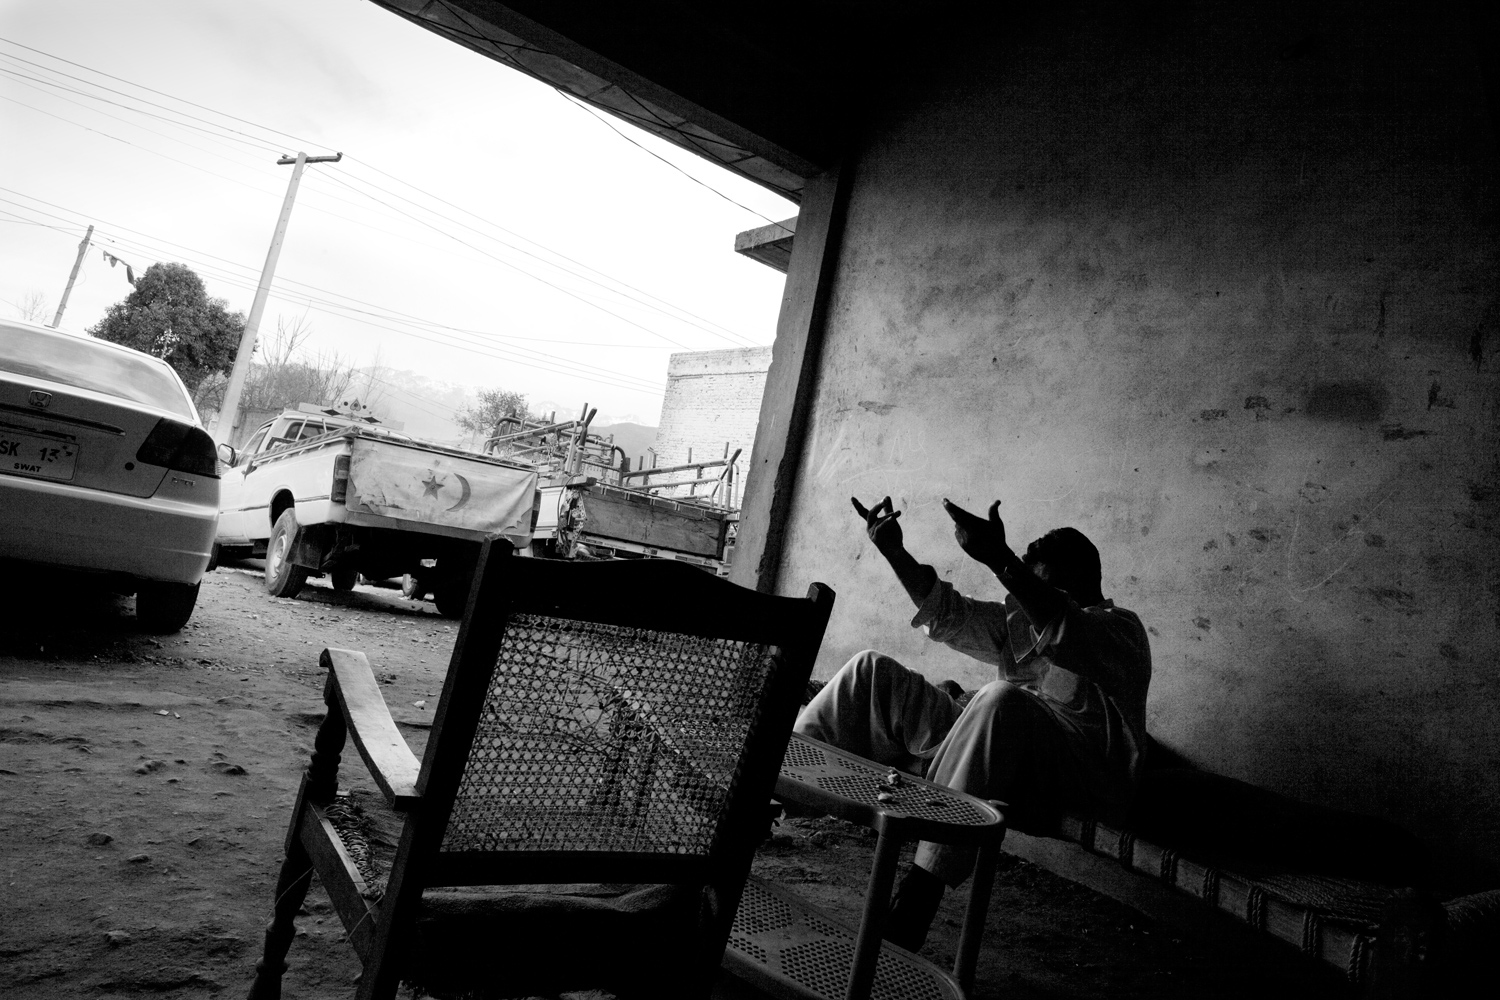 Pakistan, Swat Valley, Kanju, March 2011. Lashkar member Ameer Zaib raising his arms during a joke with one of his colleagues (out of frame) at a car showroom in Kanju. Ameer Zaib works in this showroom to provide for his wife and their two small children, but the trade is not going well in this area still troubled by the aftermath of last year's floods.